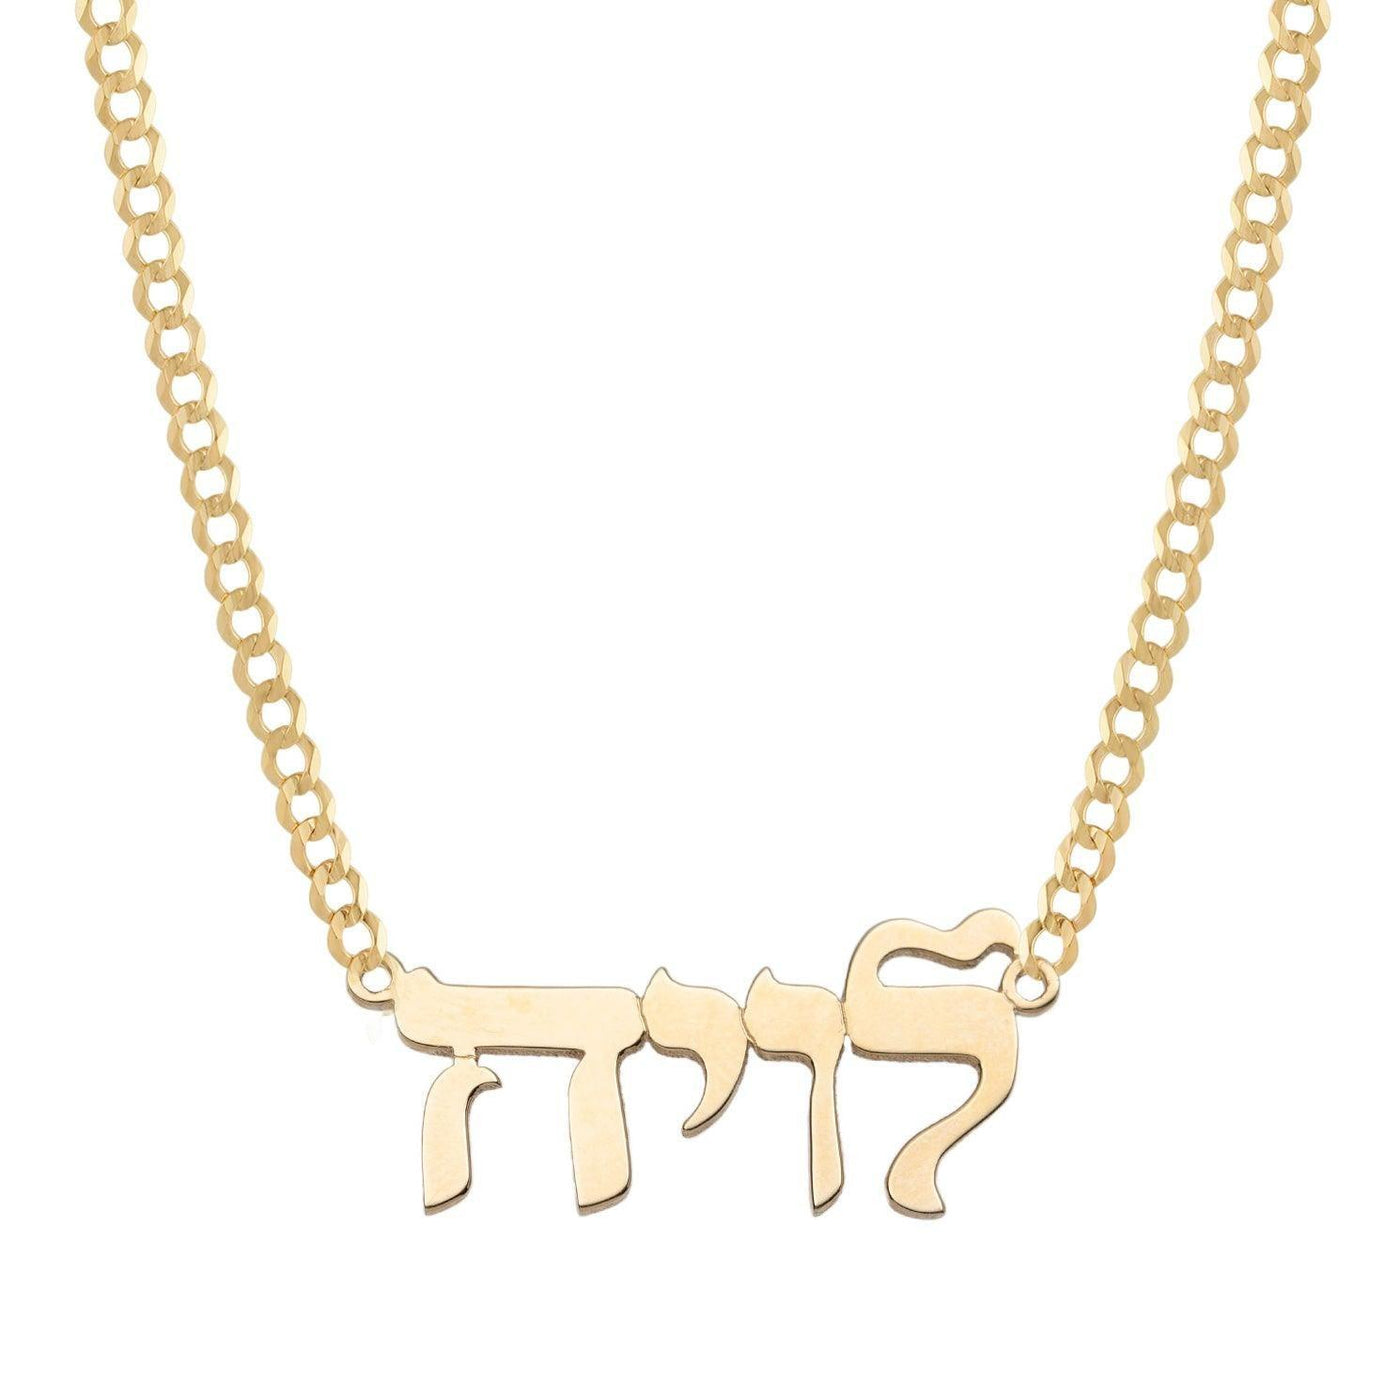 Ladies Script Name Plate Necklace 14K Gold - Style 86 - bayamjewelry